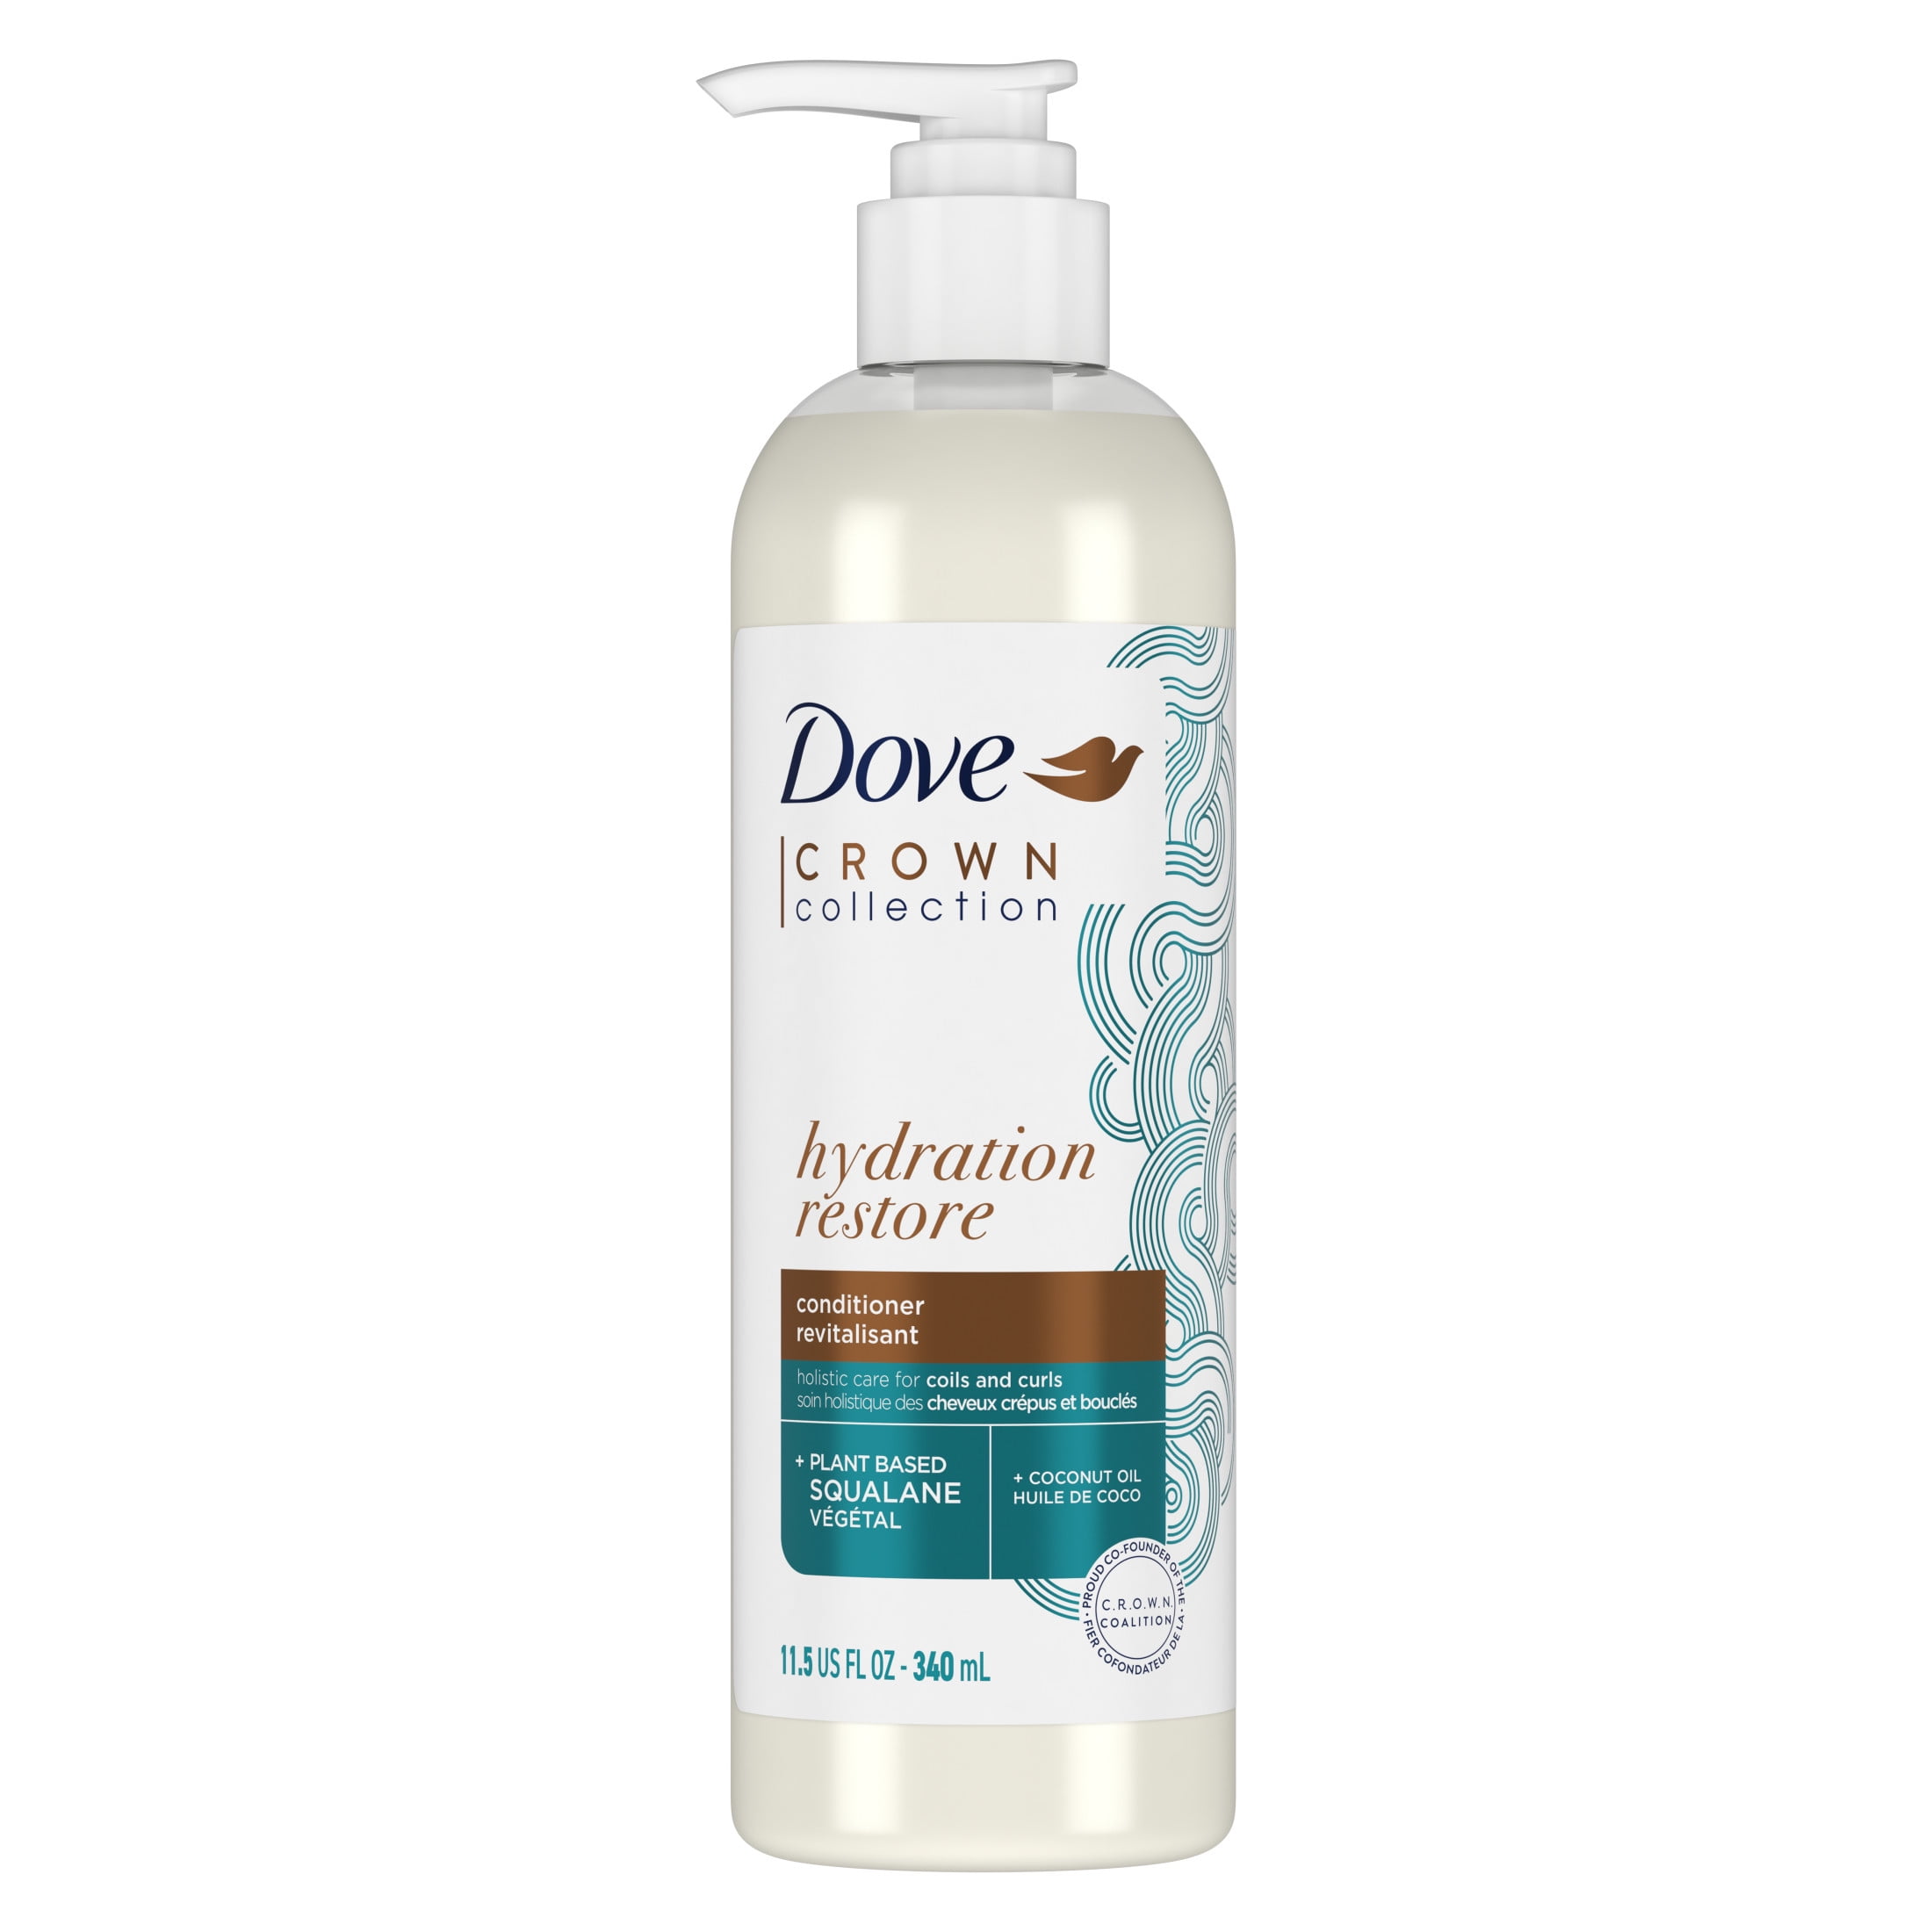 Dove CROWN Collection Holistic Hair Care Hydration Restore, 11.5 oz